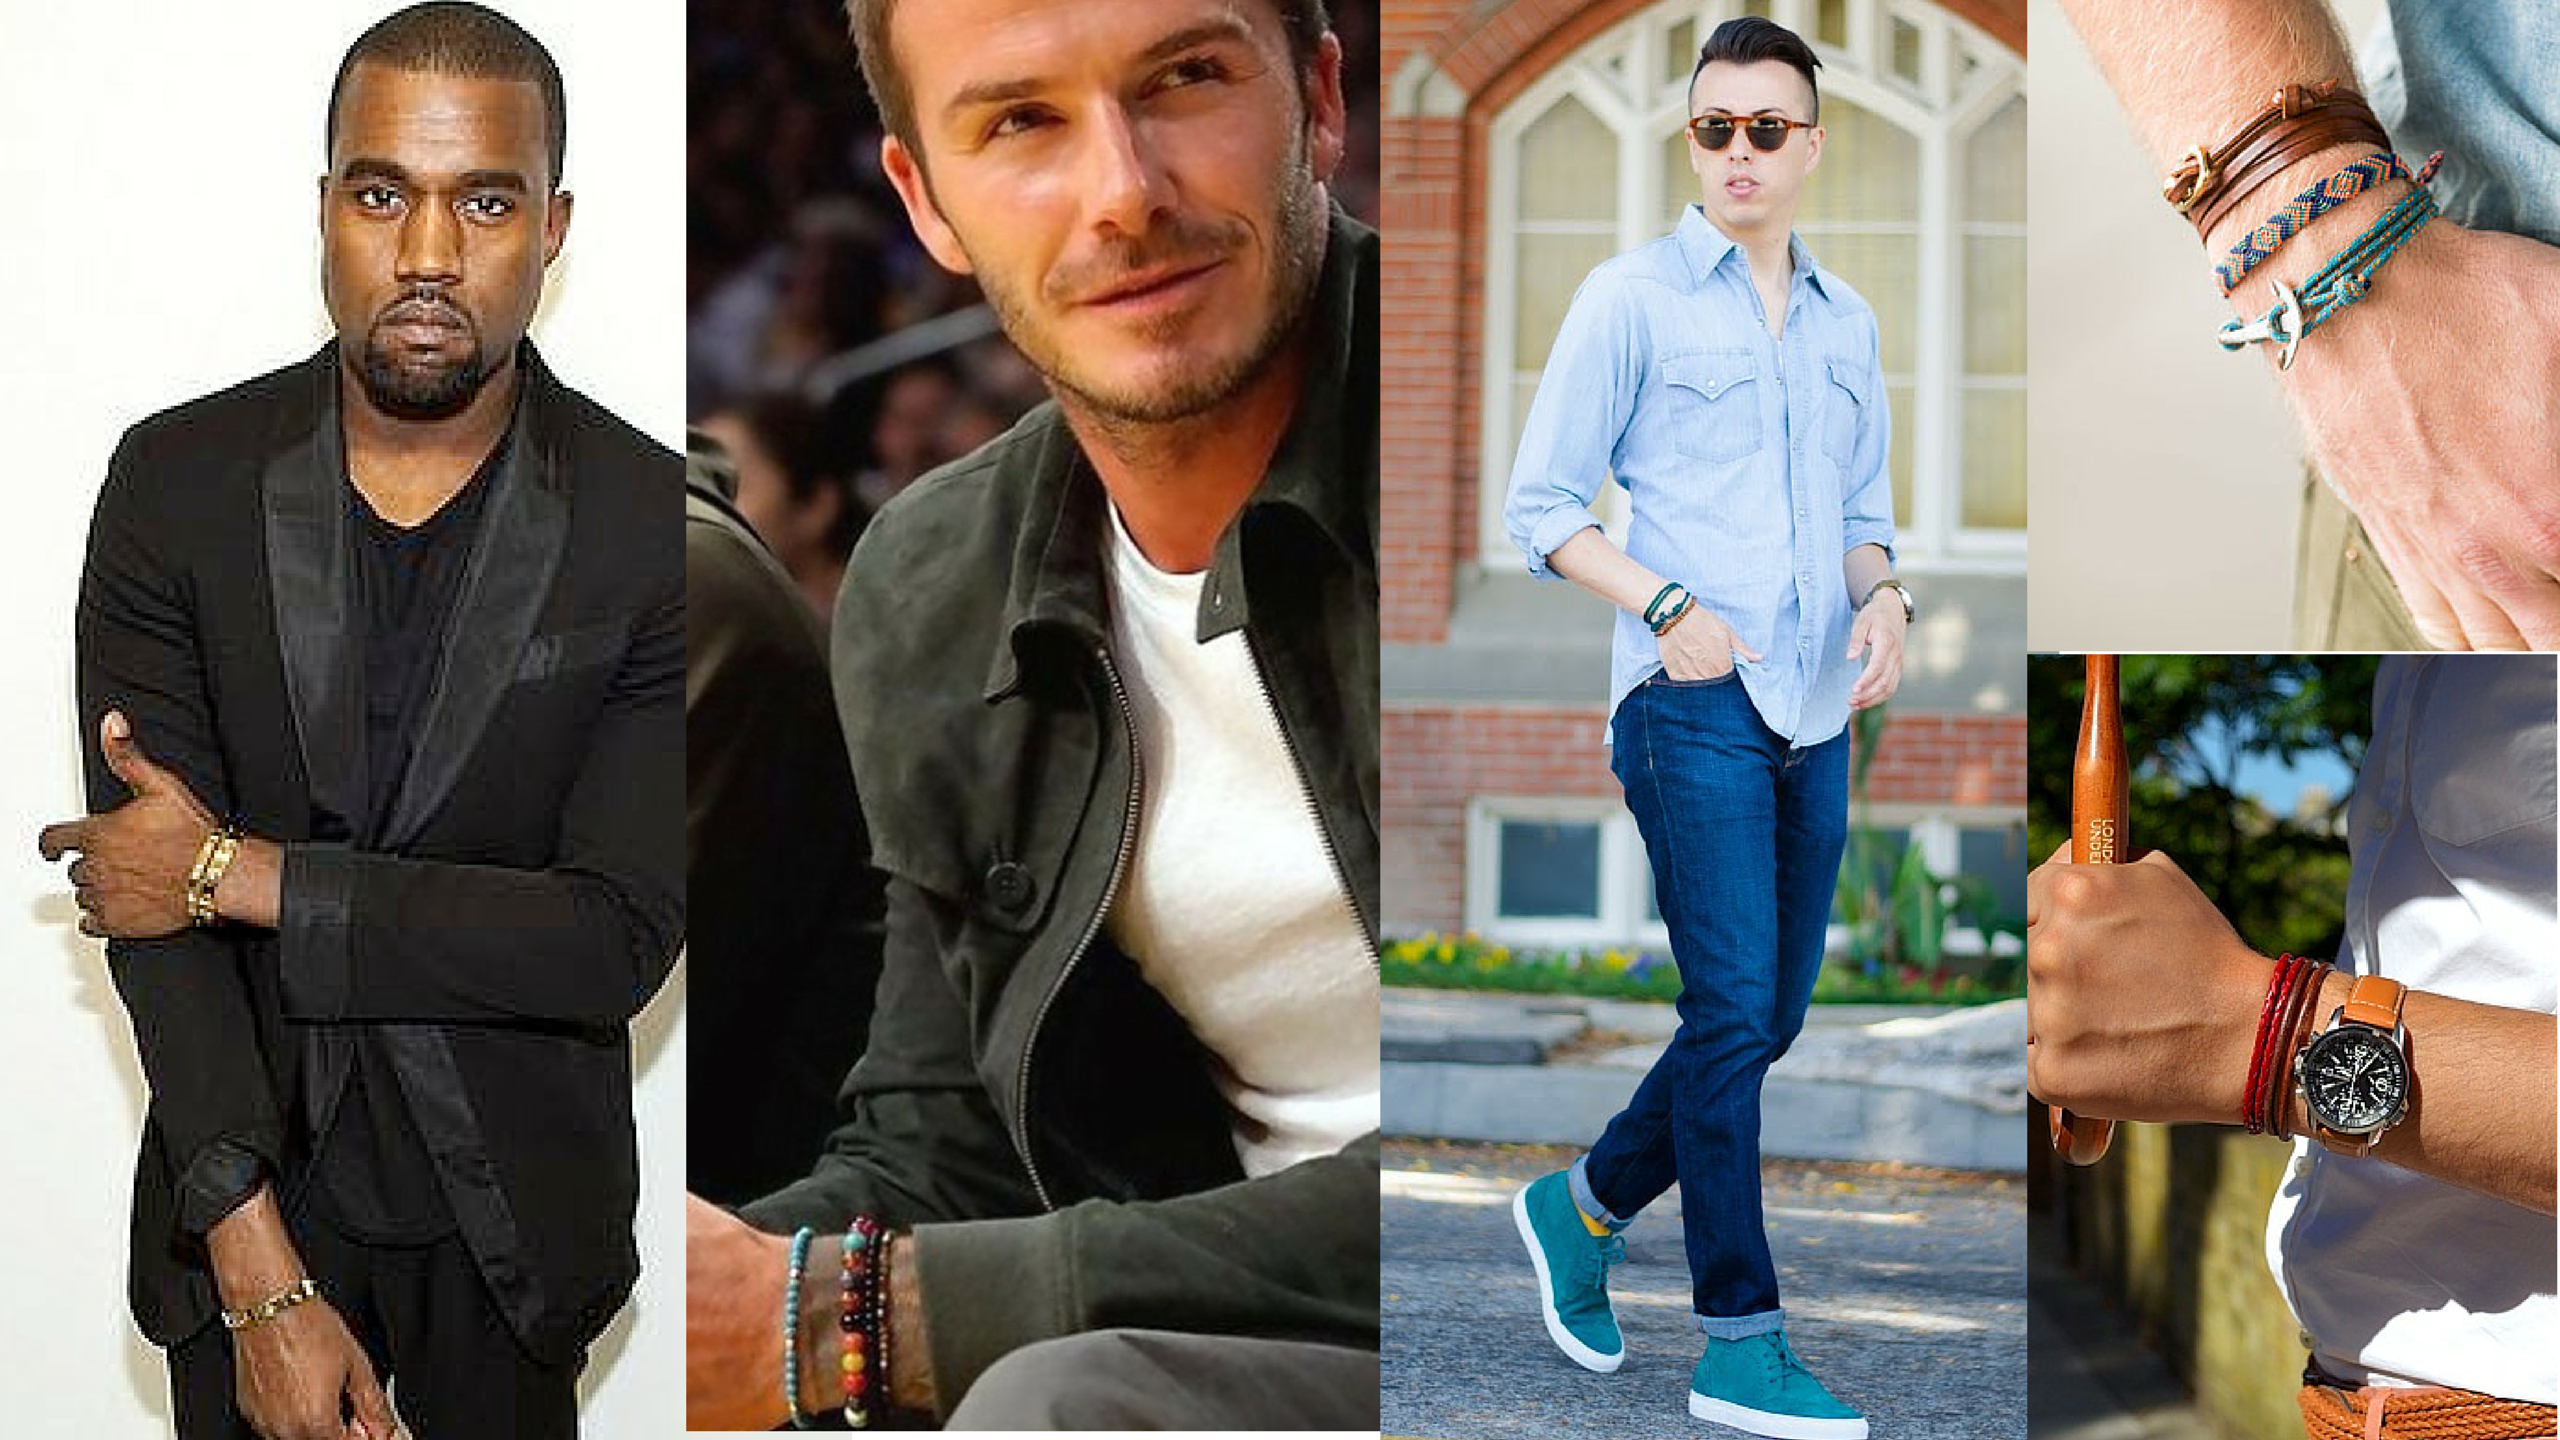 A Man's Guide To Wearing A Bracelet  When And How To Wear Men's Bracelets